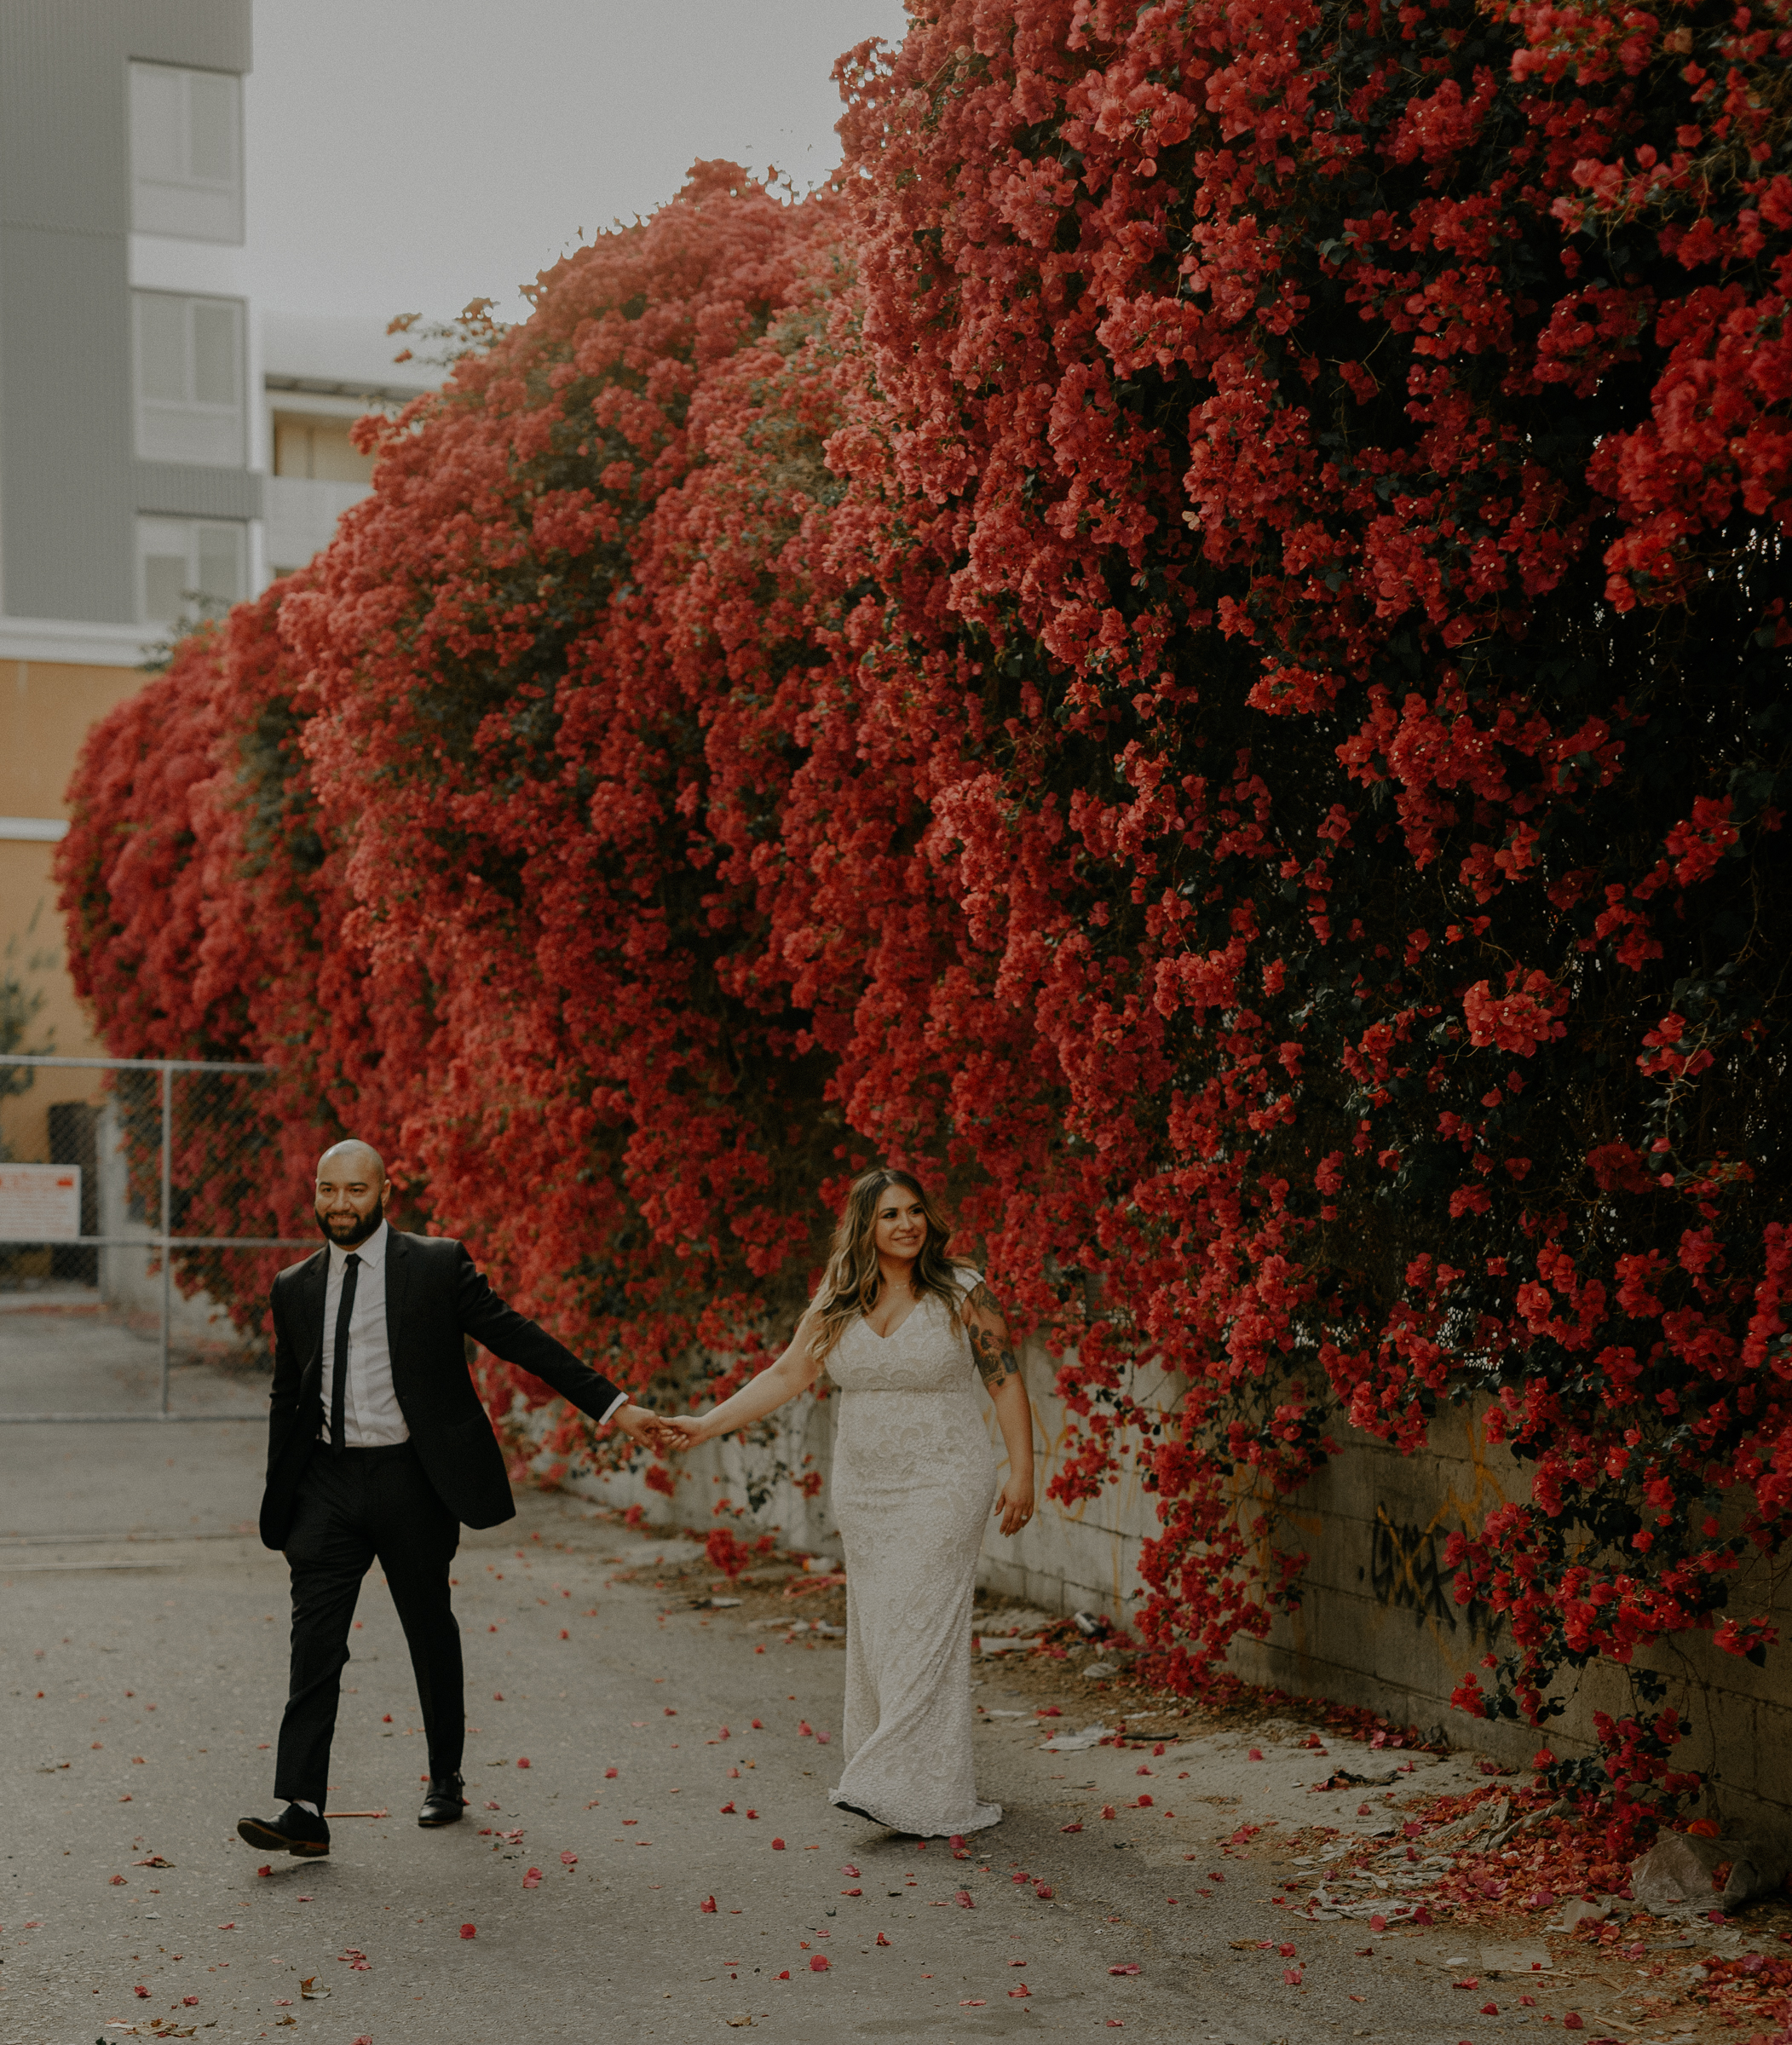 Isaiah + Taylor Photography - Los Angeles Wedding Photographer - DTLA Arts District  Engagement Session  026.jpg